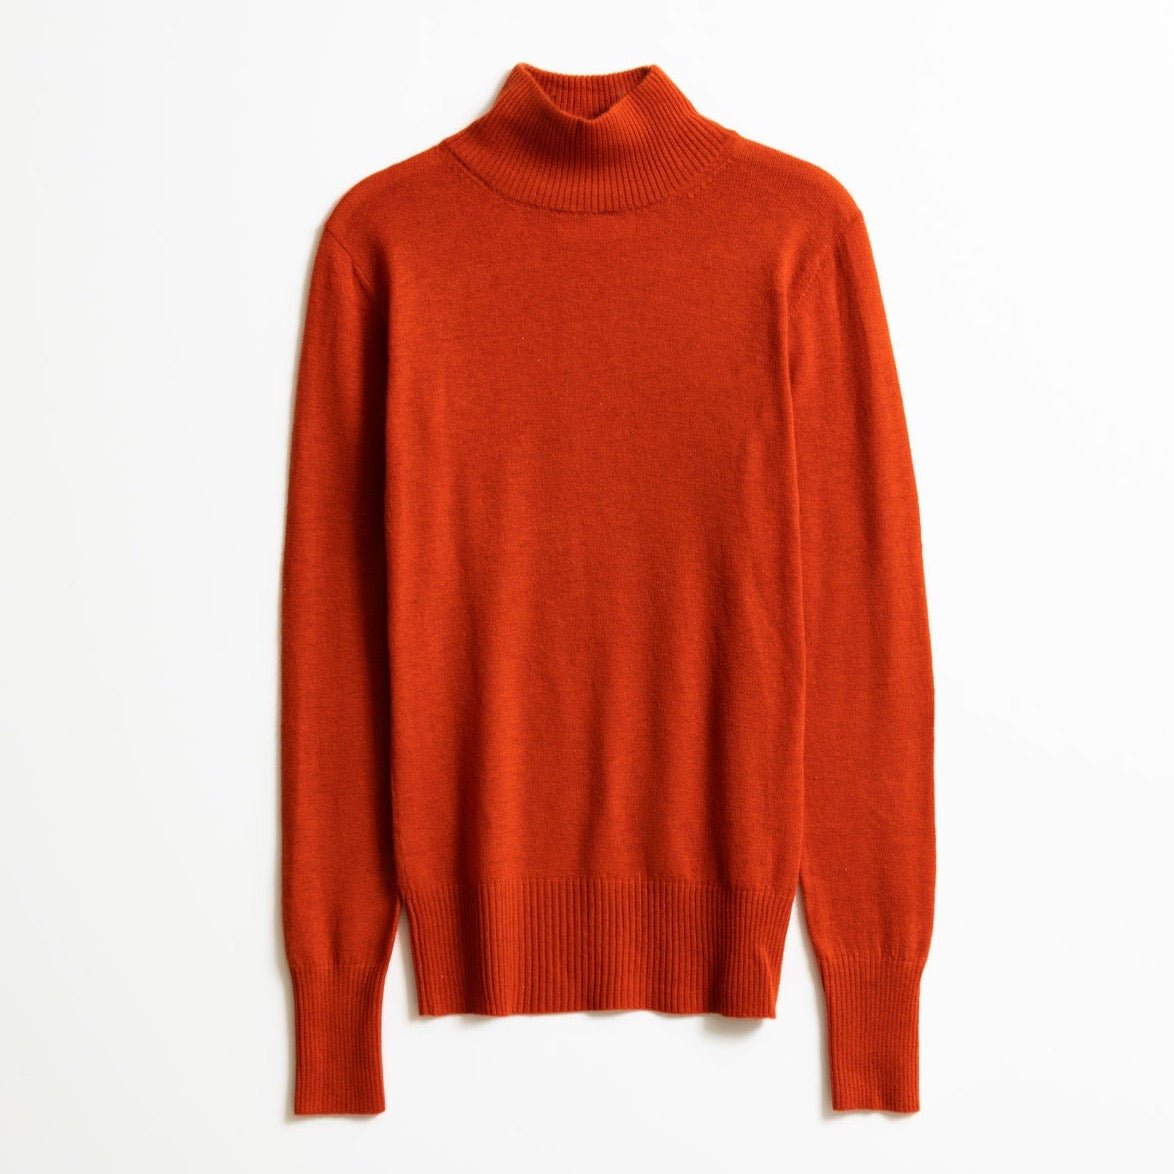 A long sleeve knitted mock neck turtleneck in a bright orange. The Merino Turtleneck in Burnt Orange is designed by Dinadi and hand knitted in Kathmandu, Nepal.